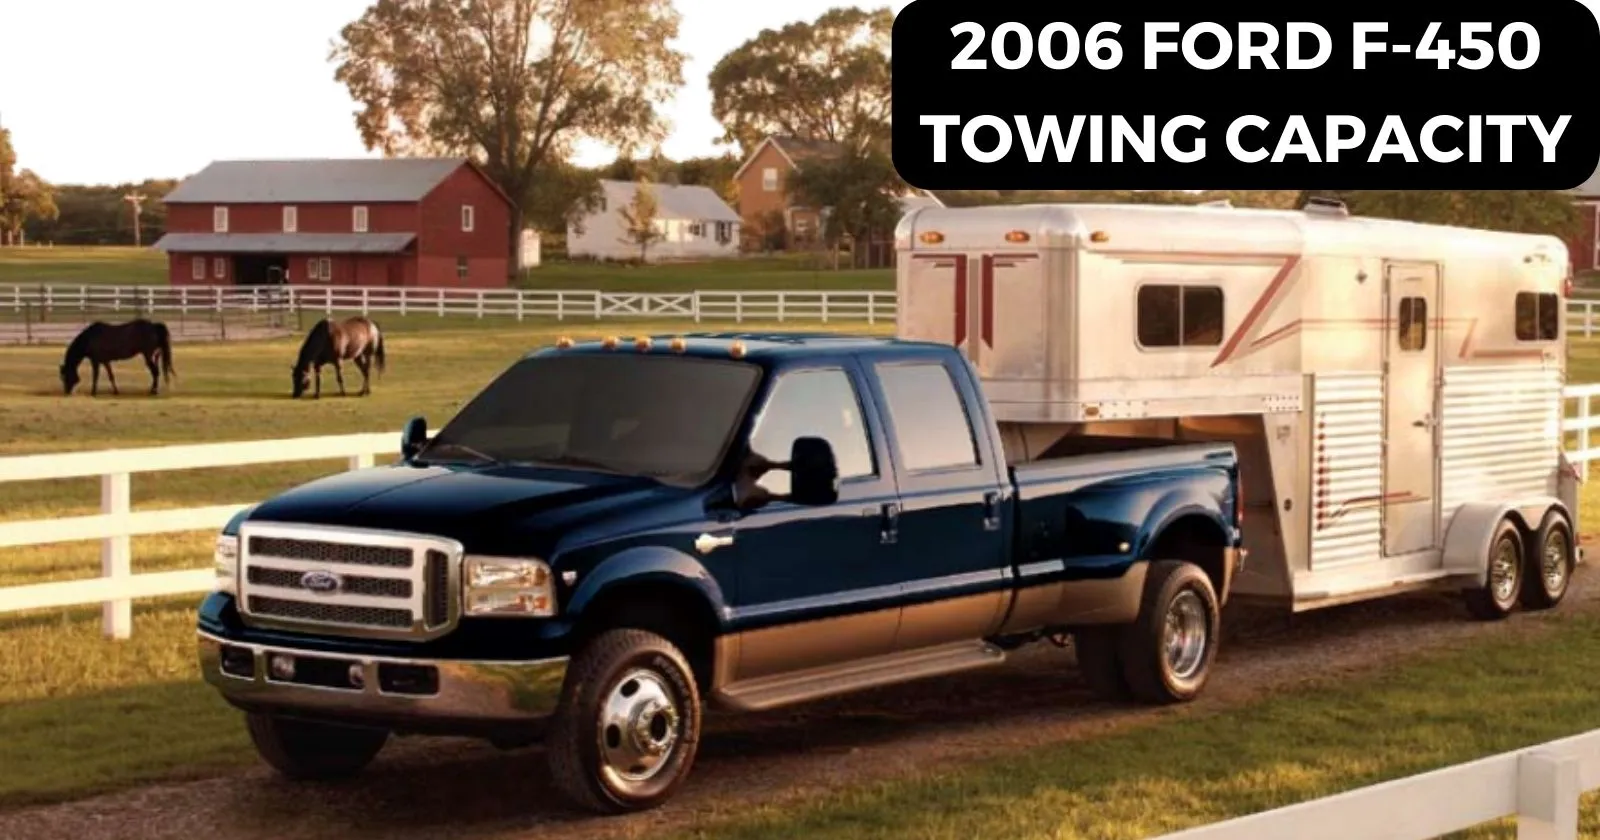 explore-2006-ford-f450-towing-capacity-with-charts-thecartowing